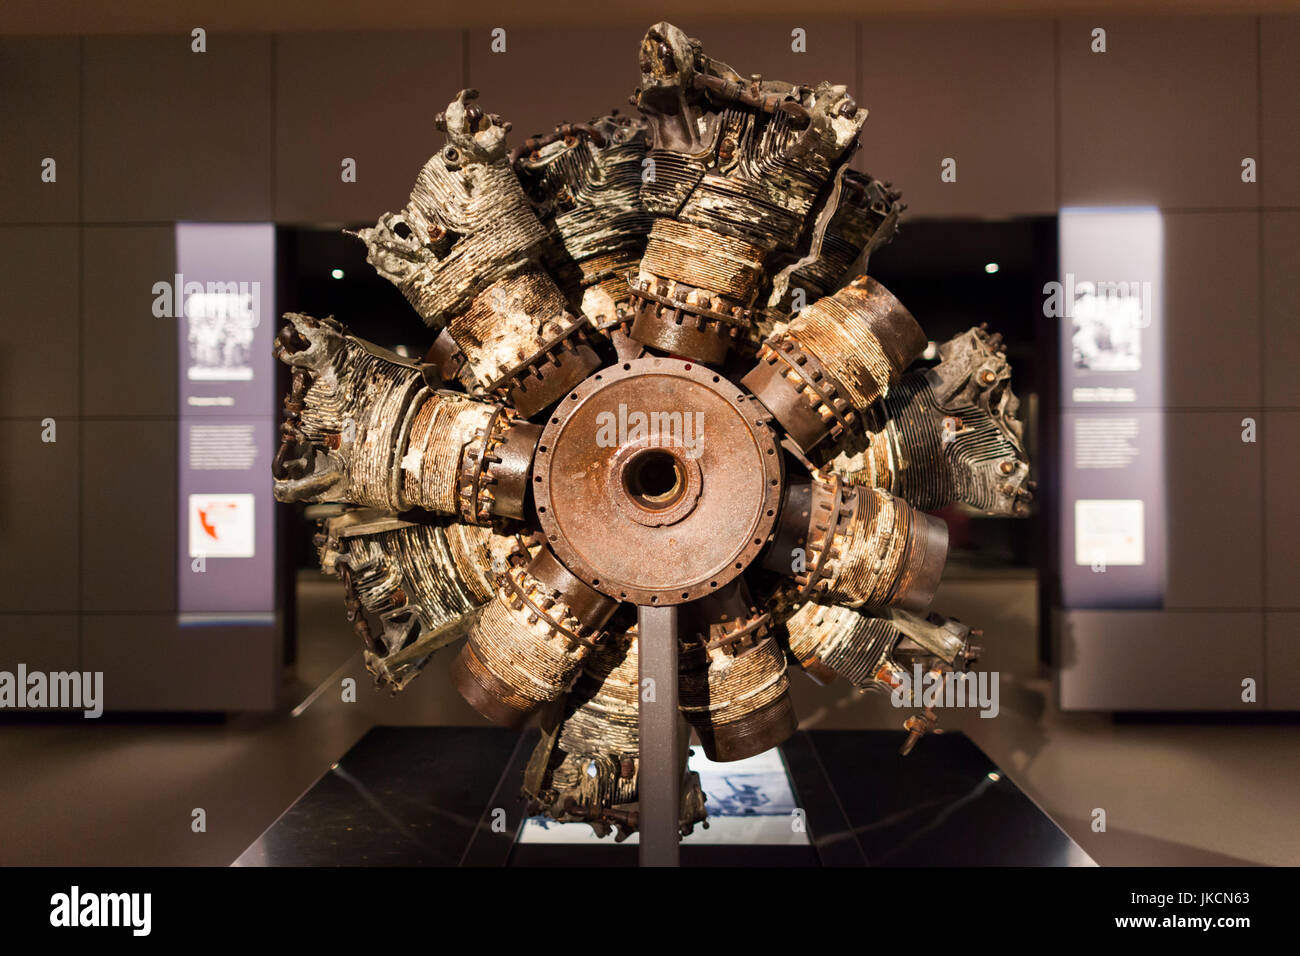 Australia, Australian Capital Territory, ACT, Canberra, Australian War Memorial Museum, WW2-era aircraft engine from downed aircraft found in the Pacific Ocean Stock Photo